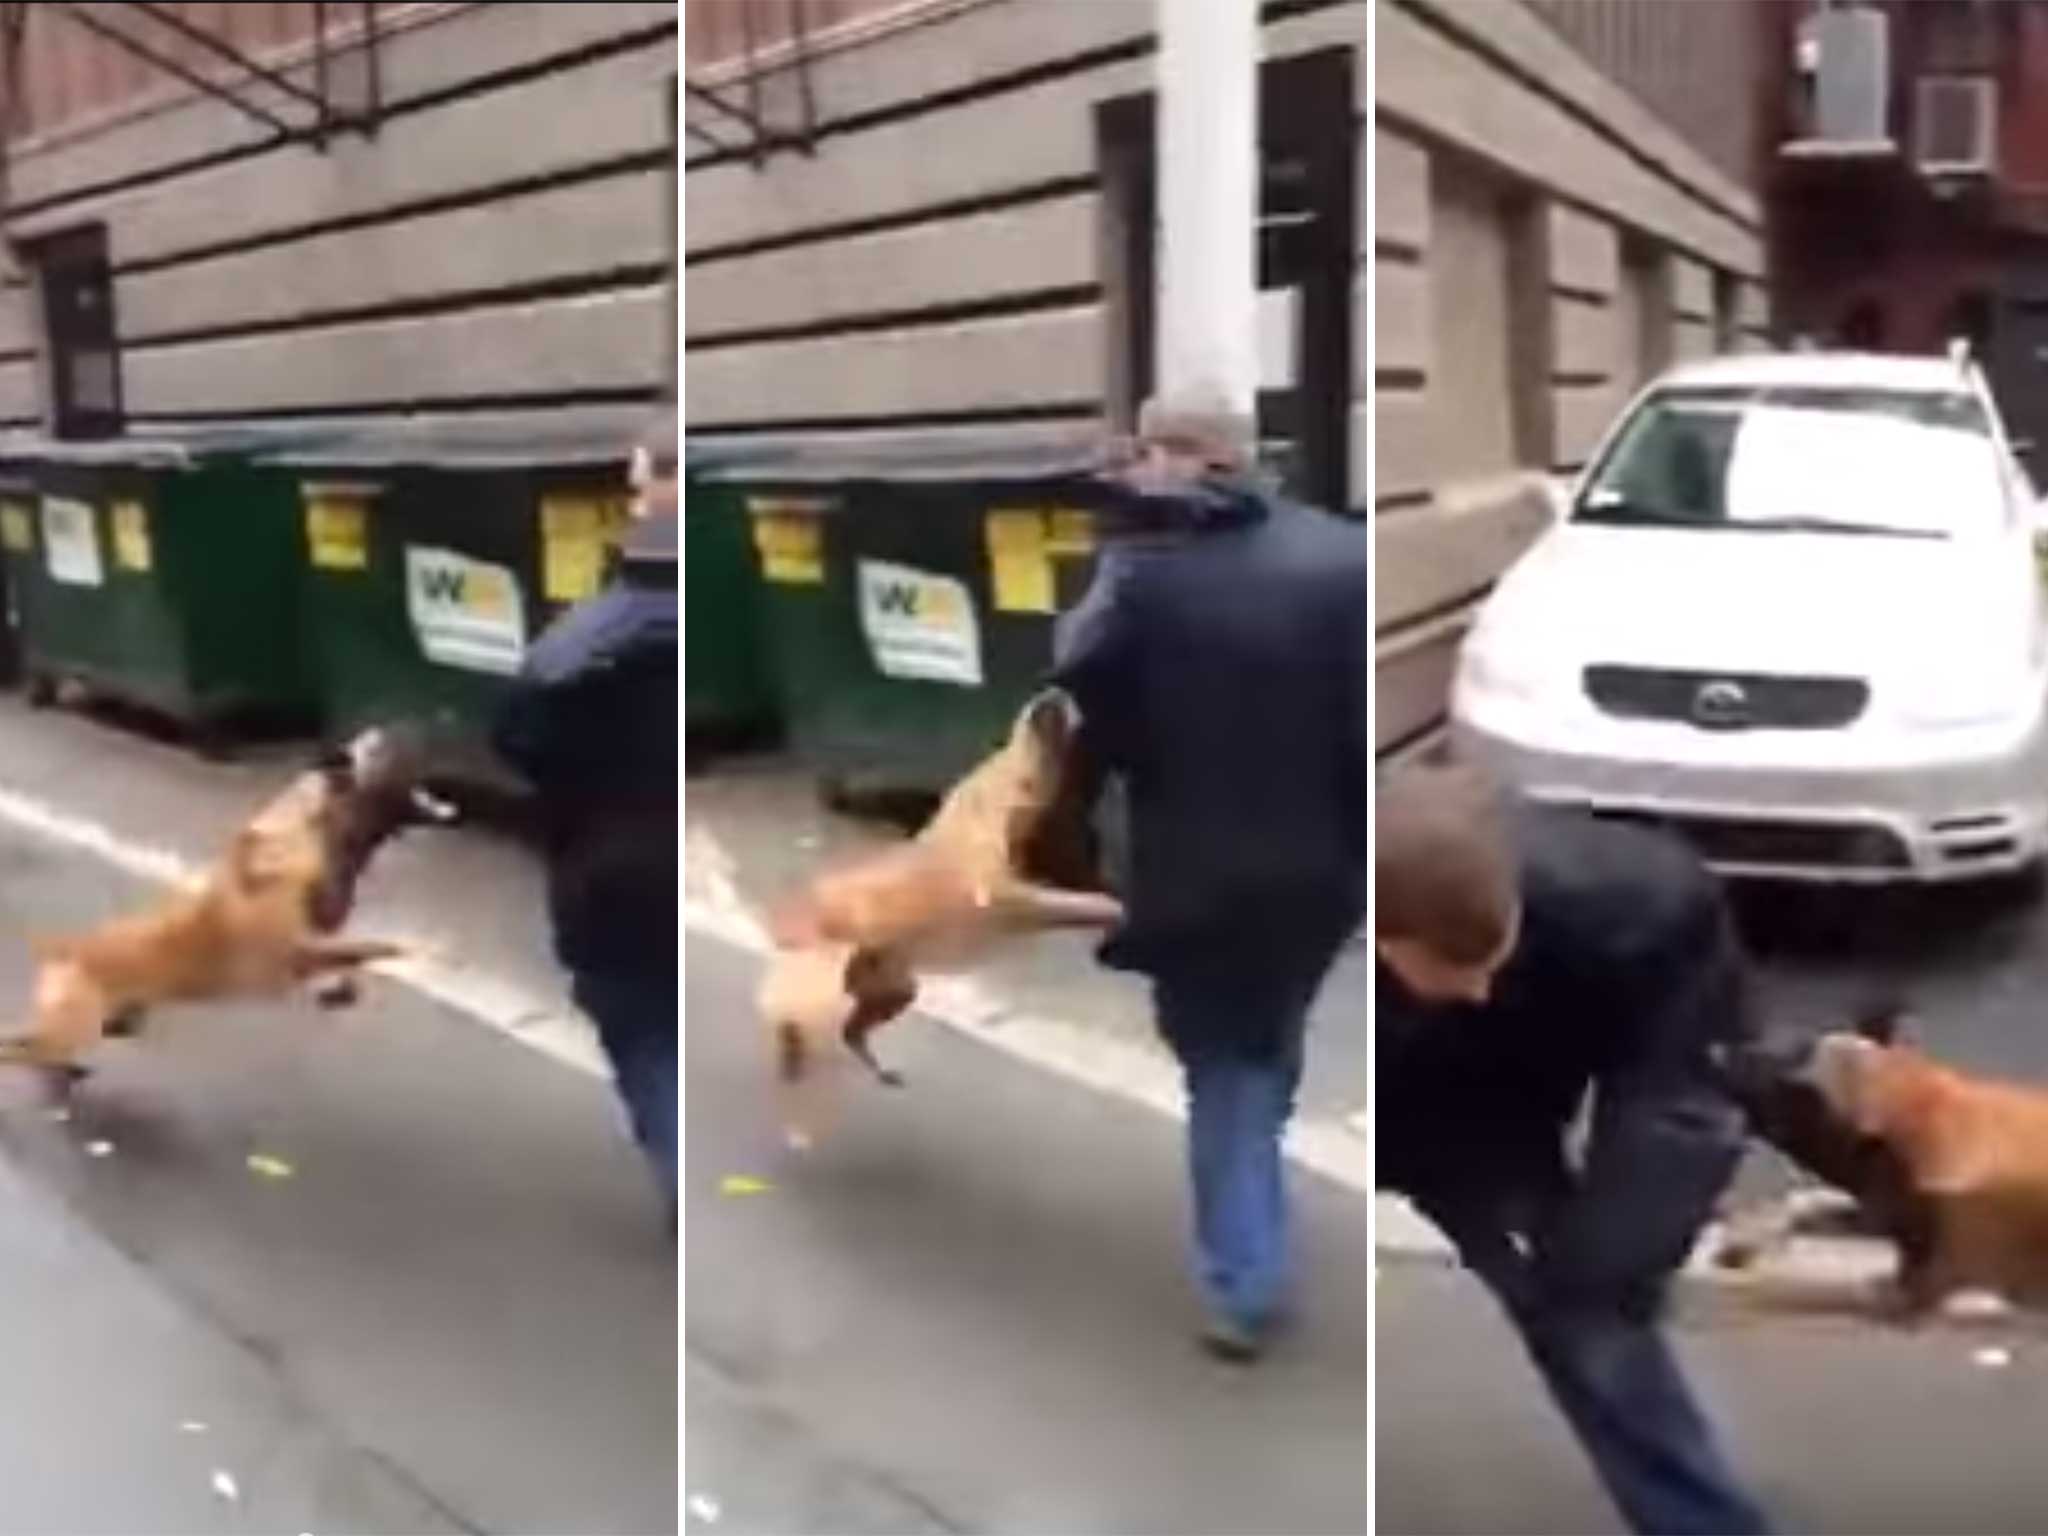 Stills from the video showing the dog attacking